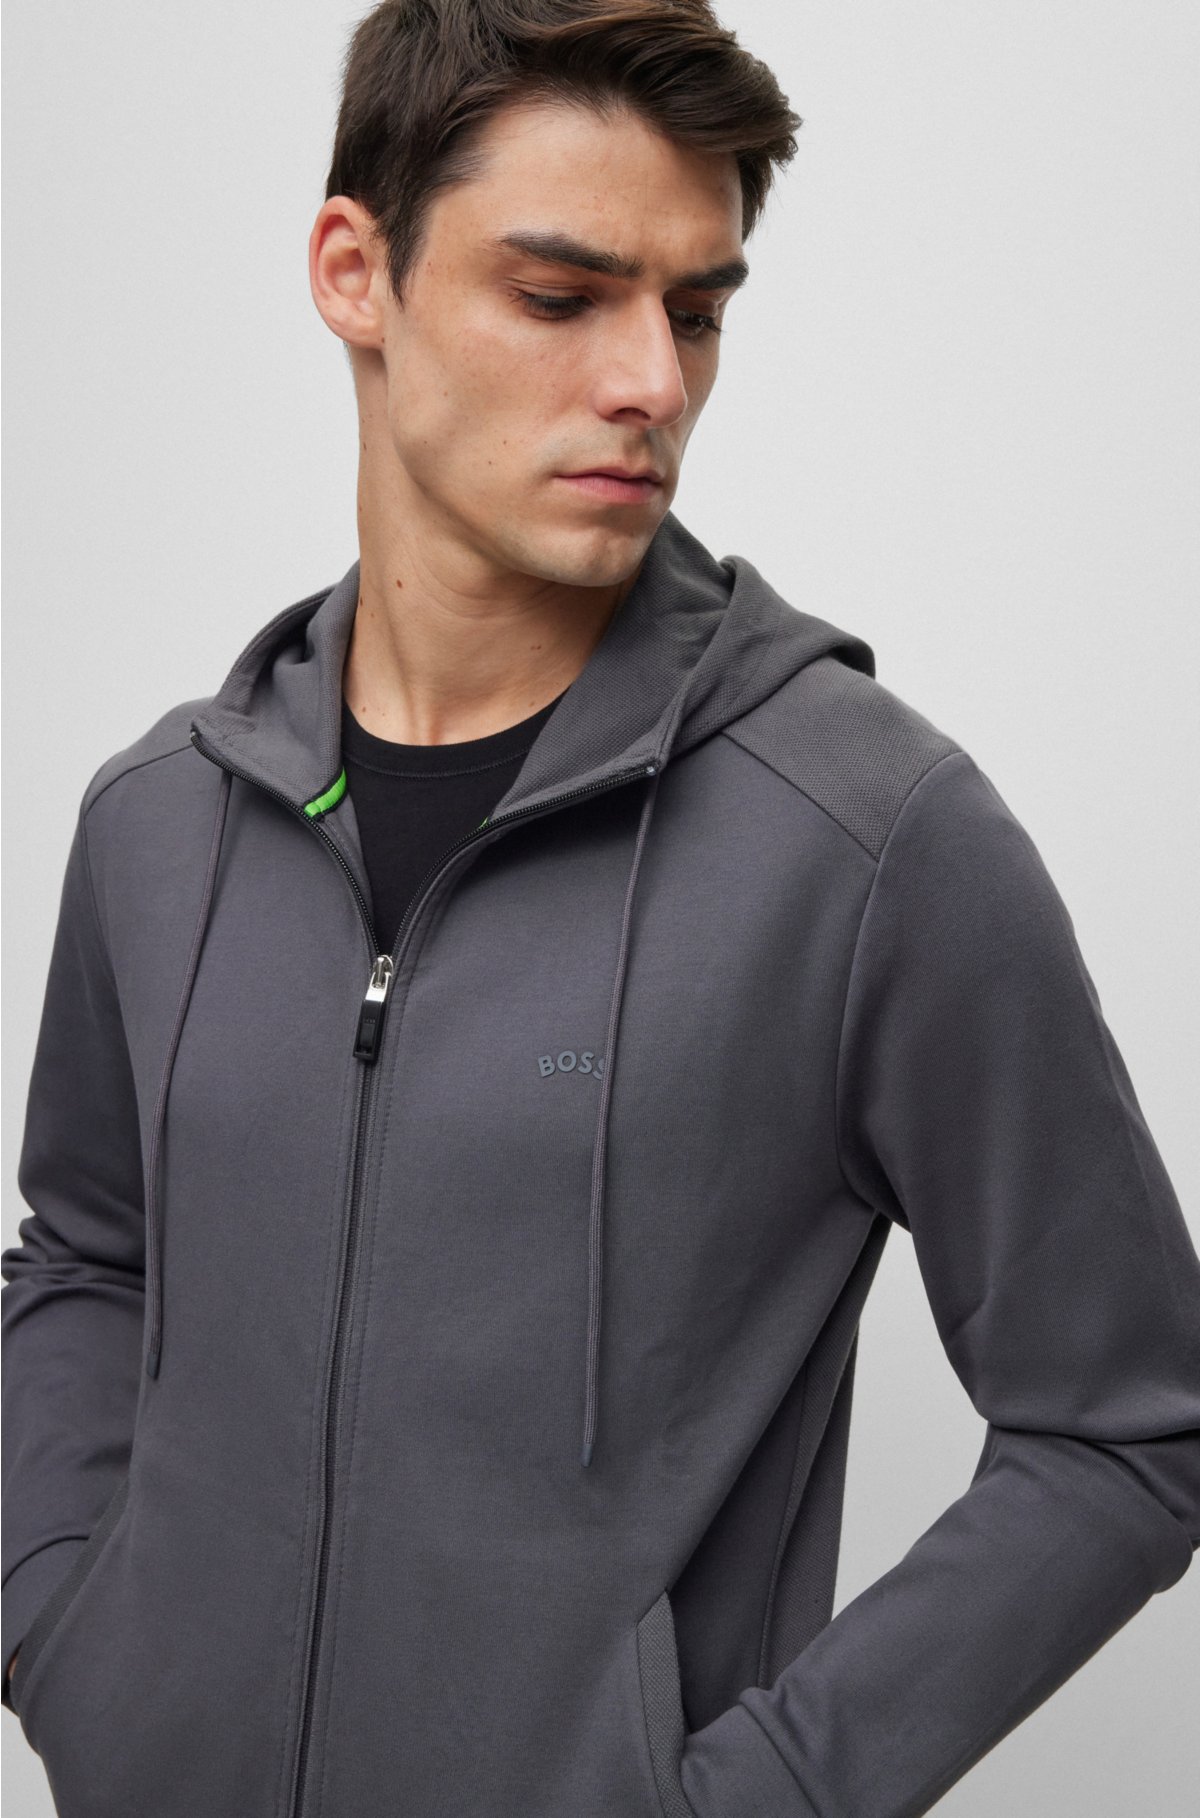 BOSS - Zip-up hoodie in cotton with curved logo